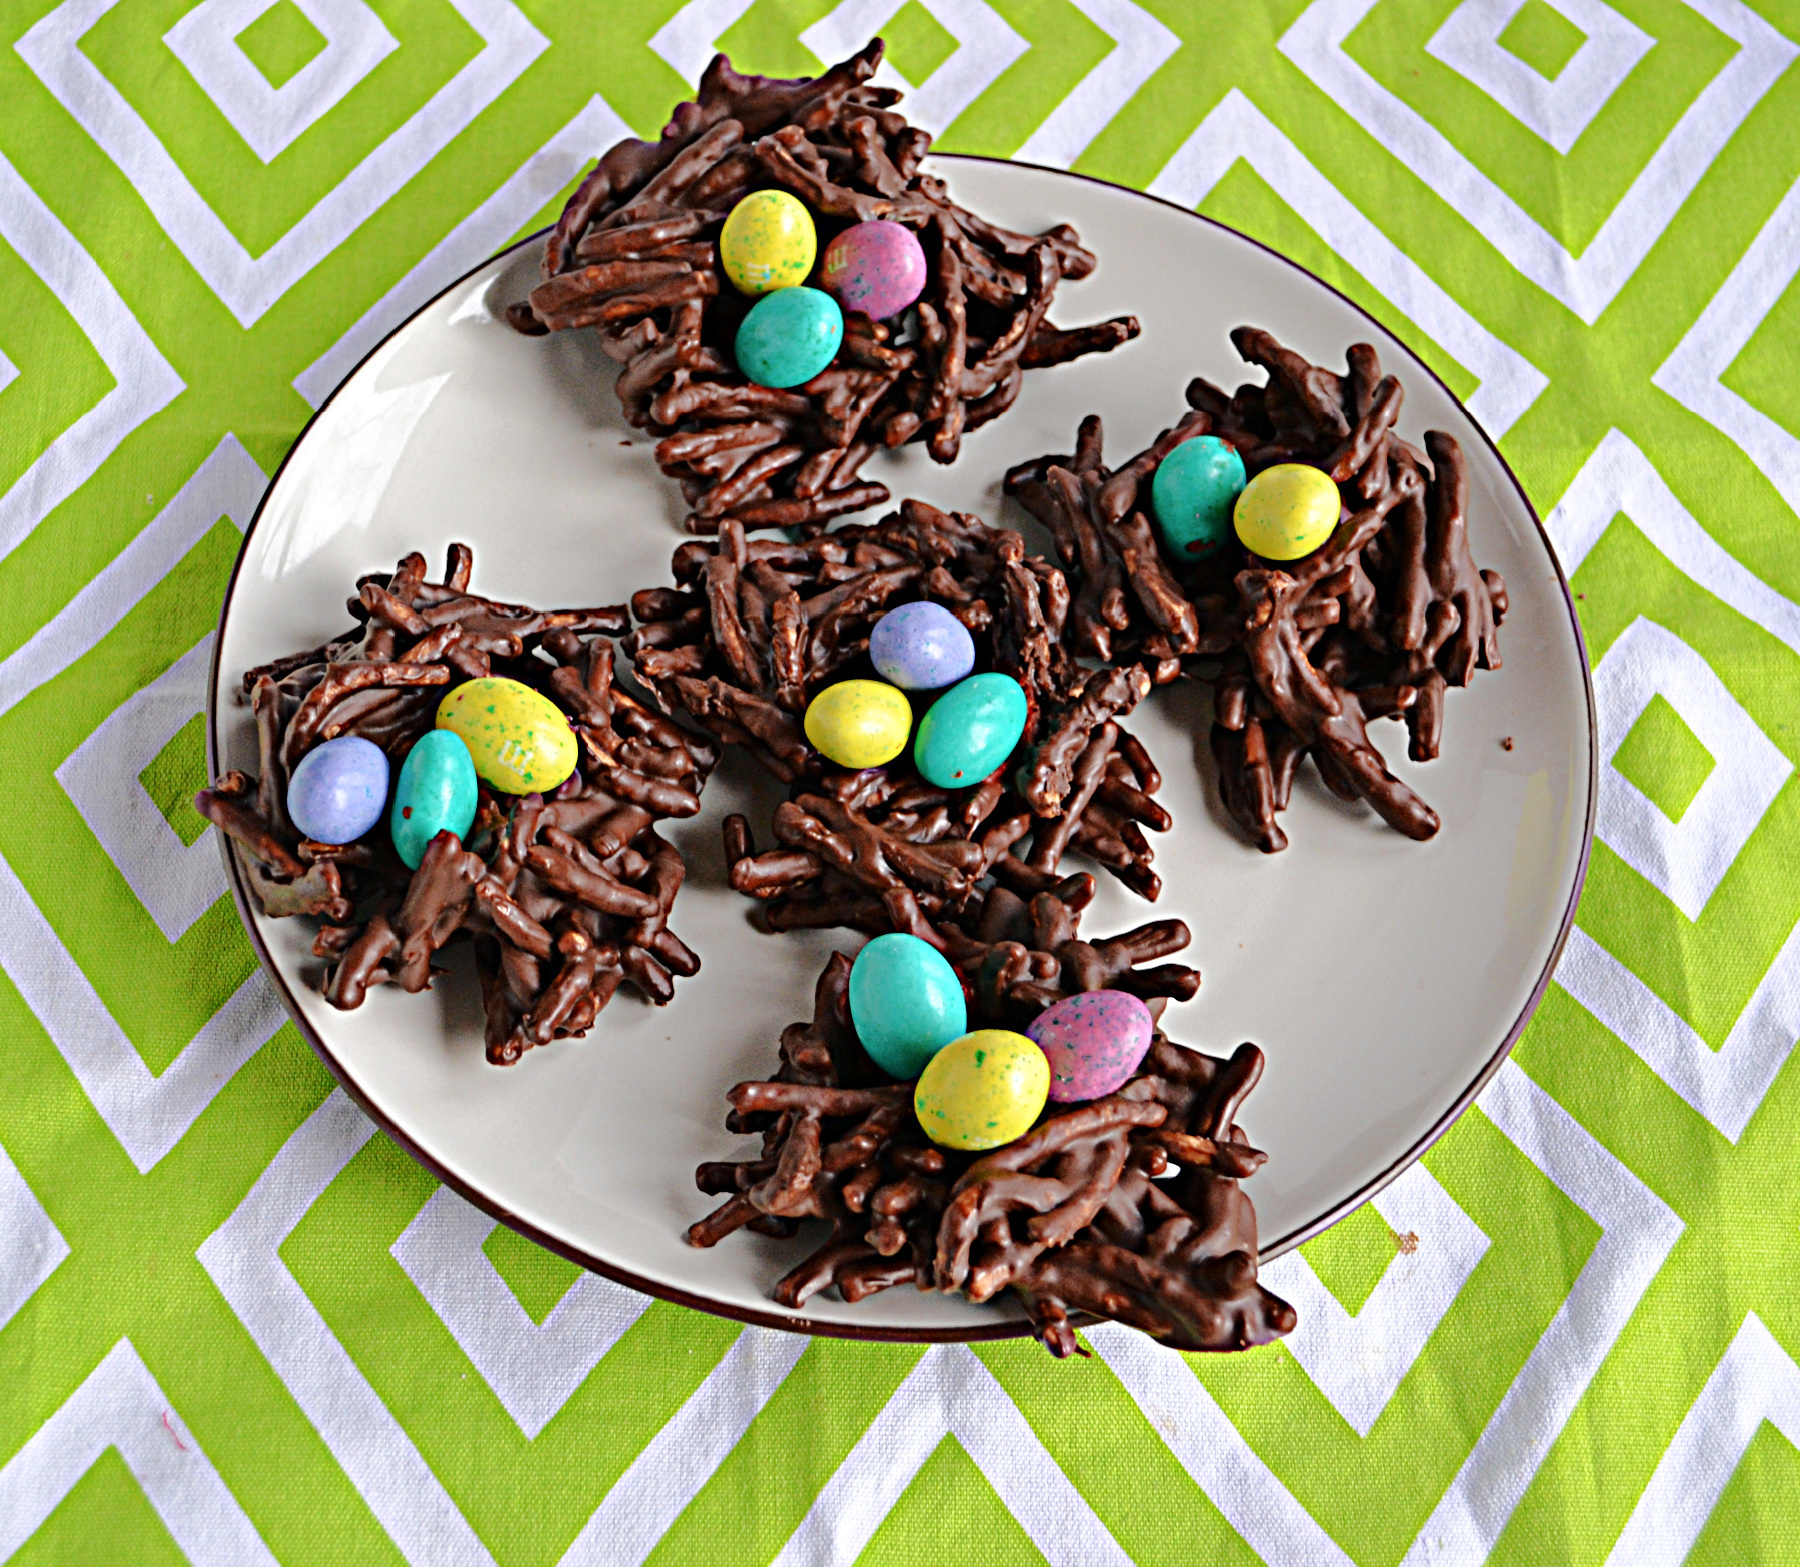 A plate of chocolate bird's nest cookies with candy coated eggs on top.